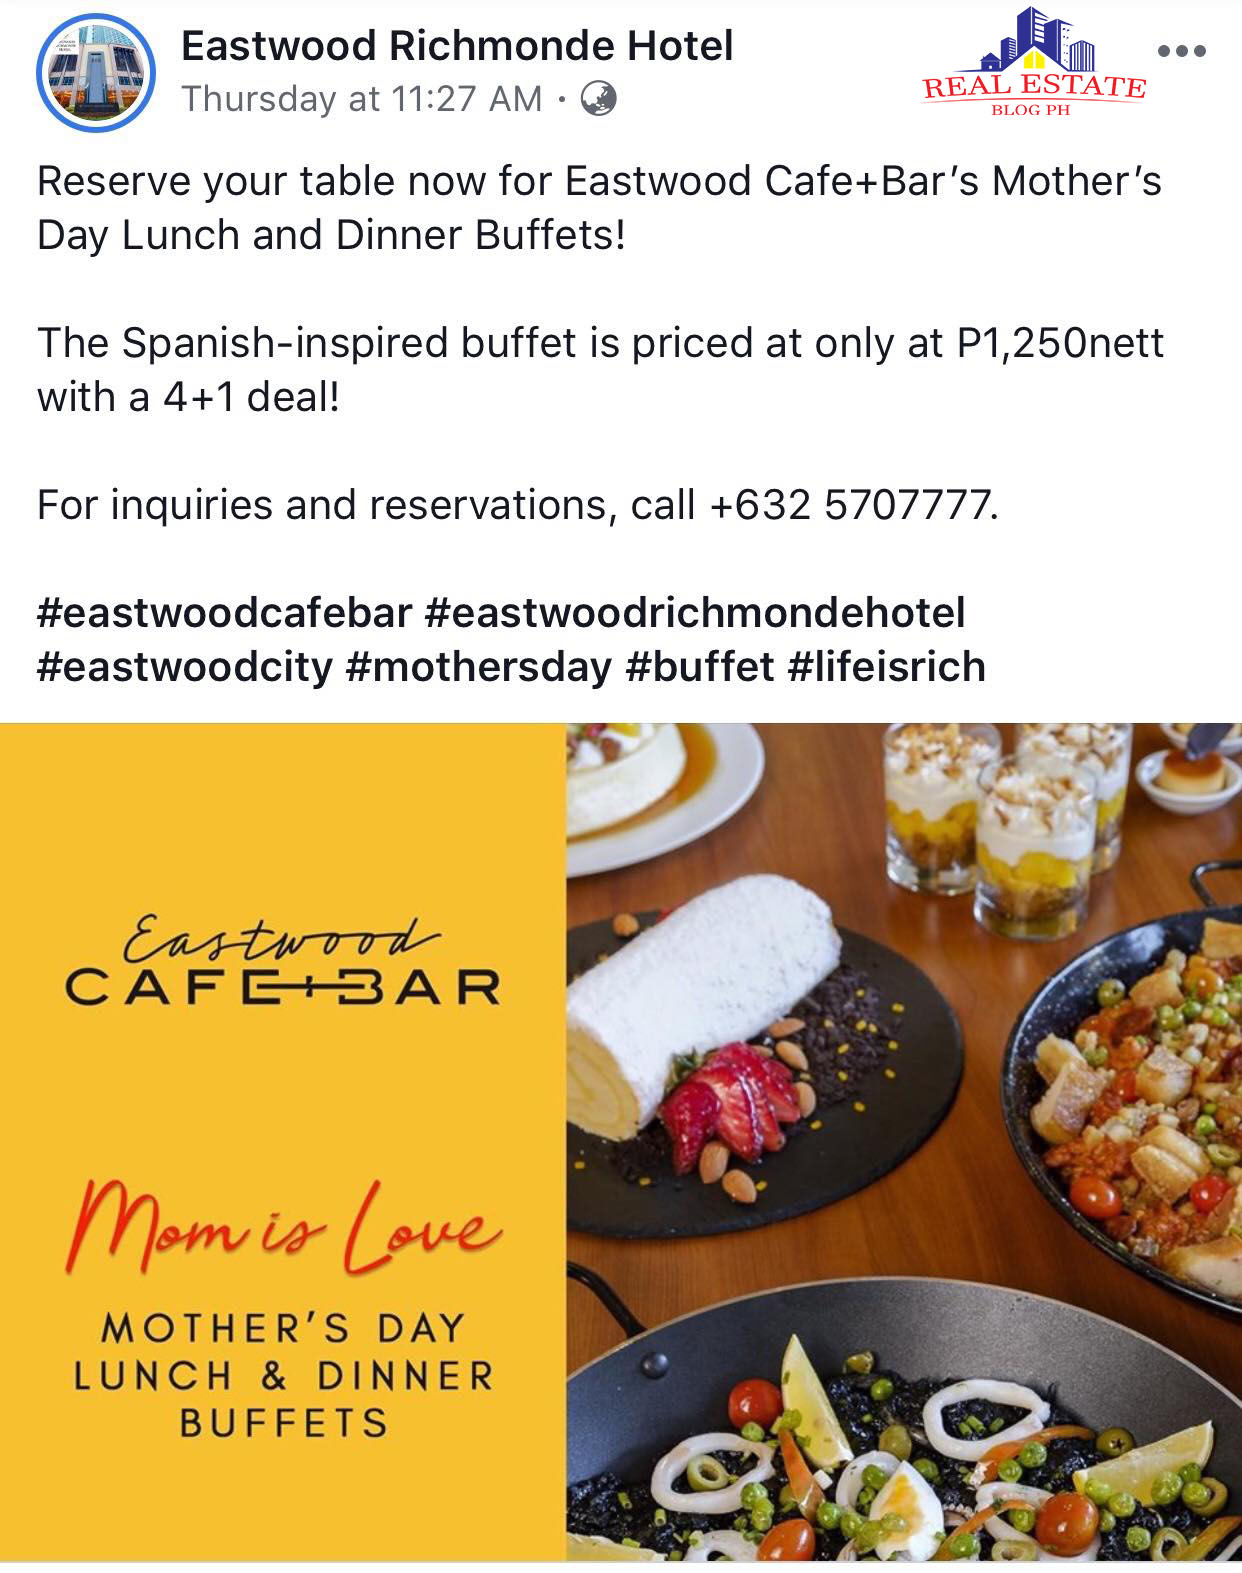 Mother's Day_Eastwood Richmonde